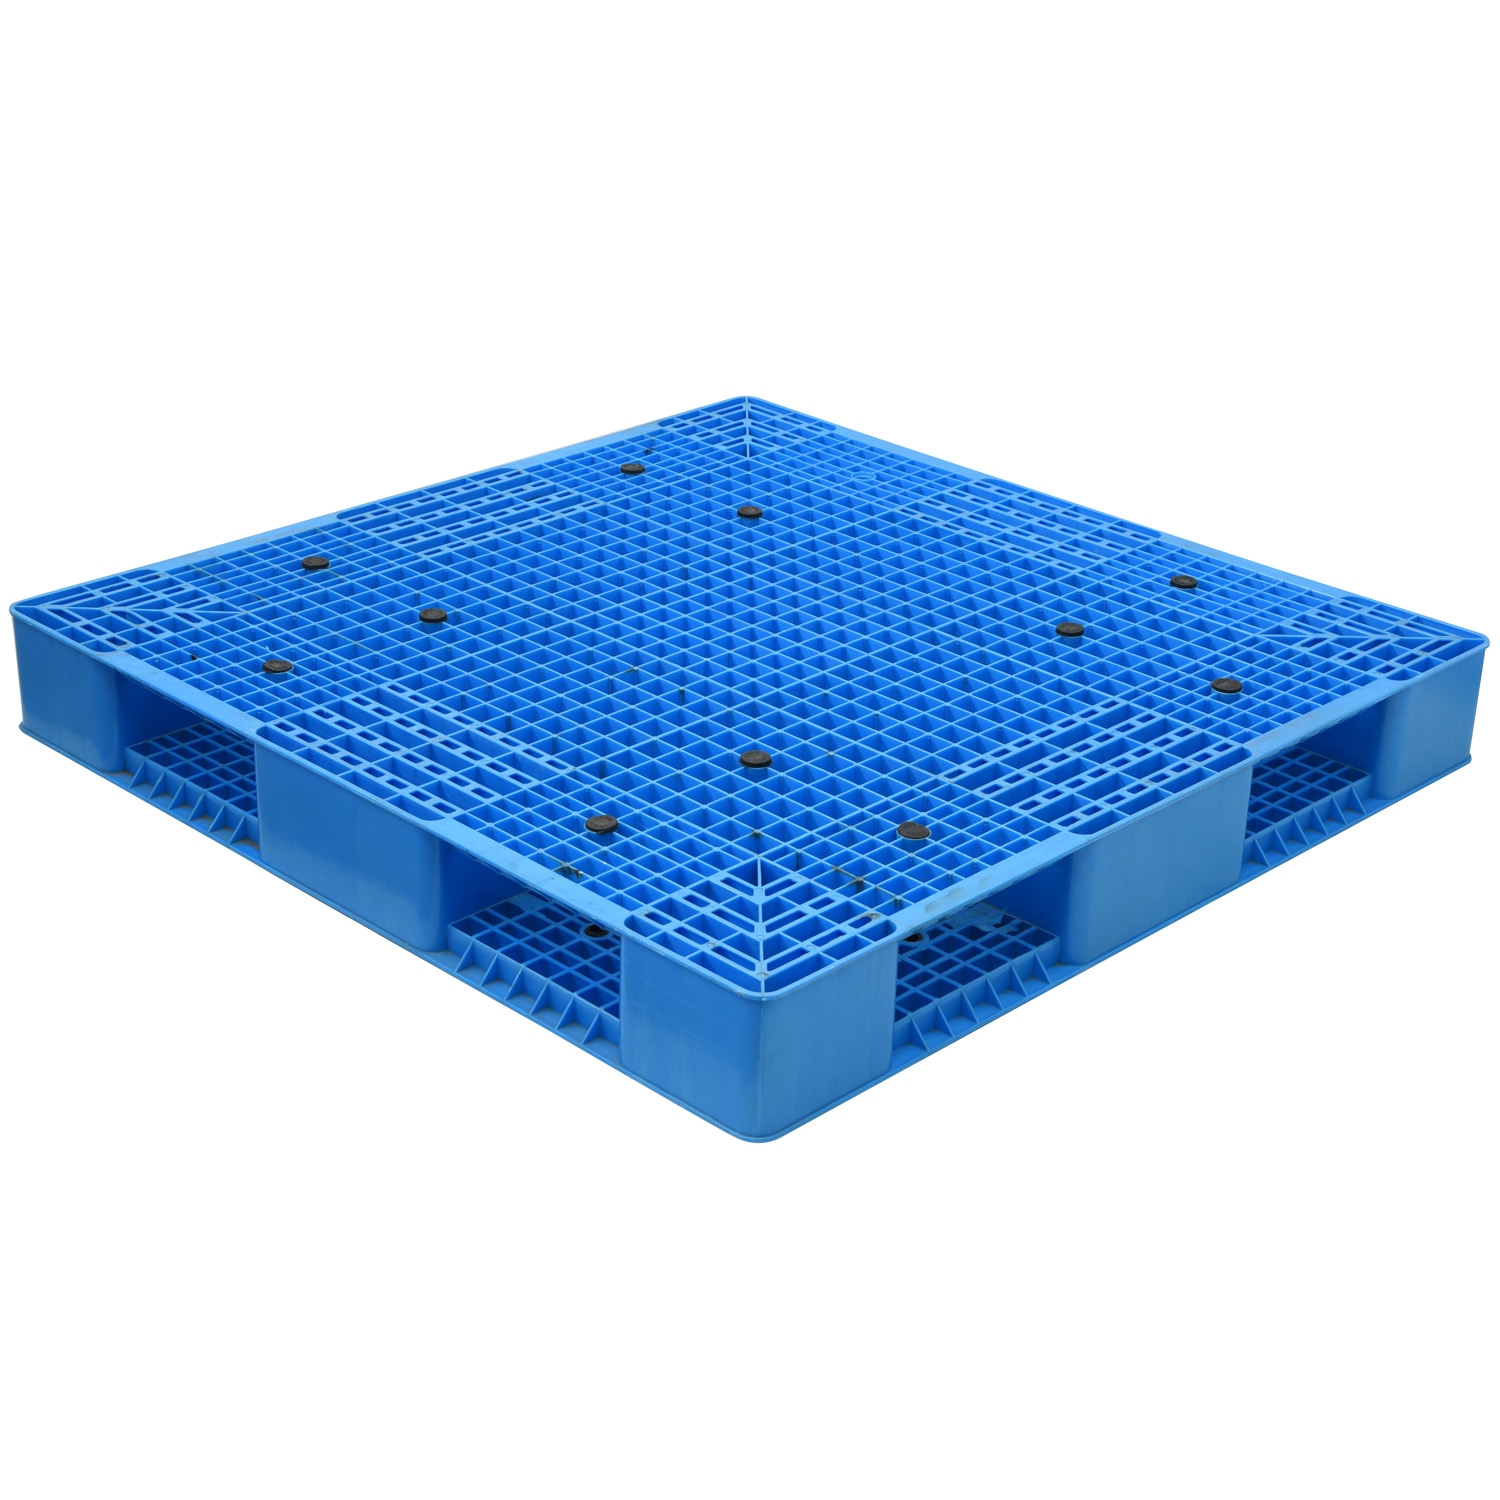 What kind of plastic pallets should be installed with anti-skid pads?